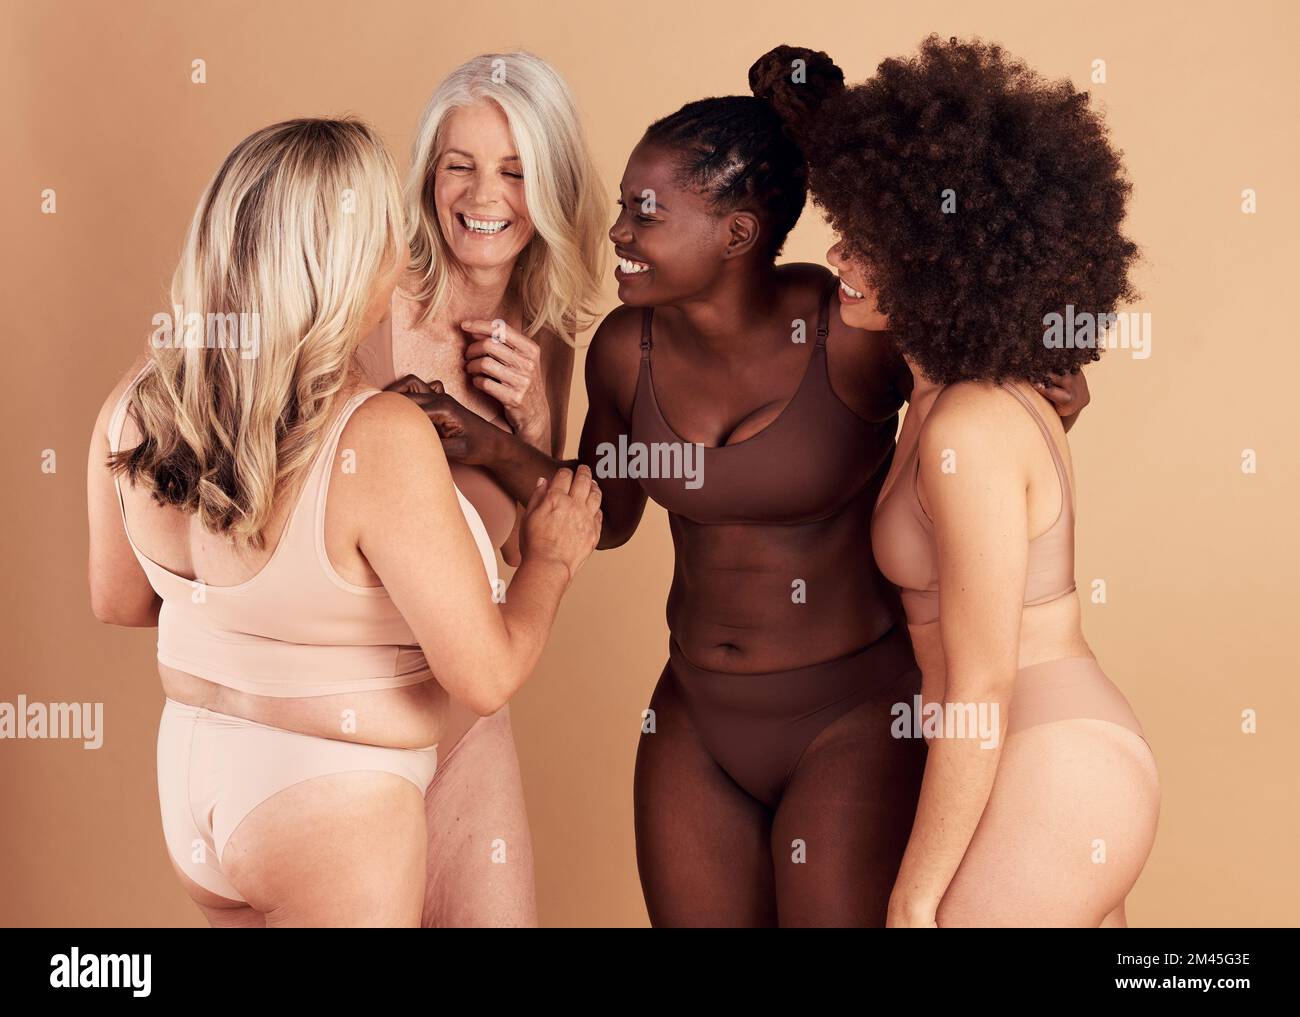 Body talk hi-res stock photography and images picture